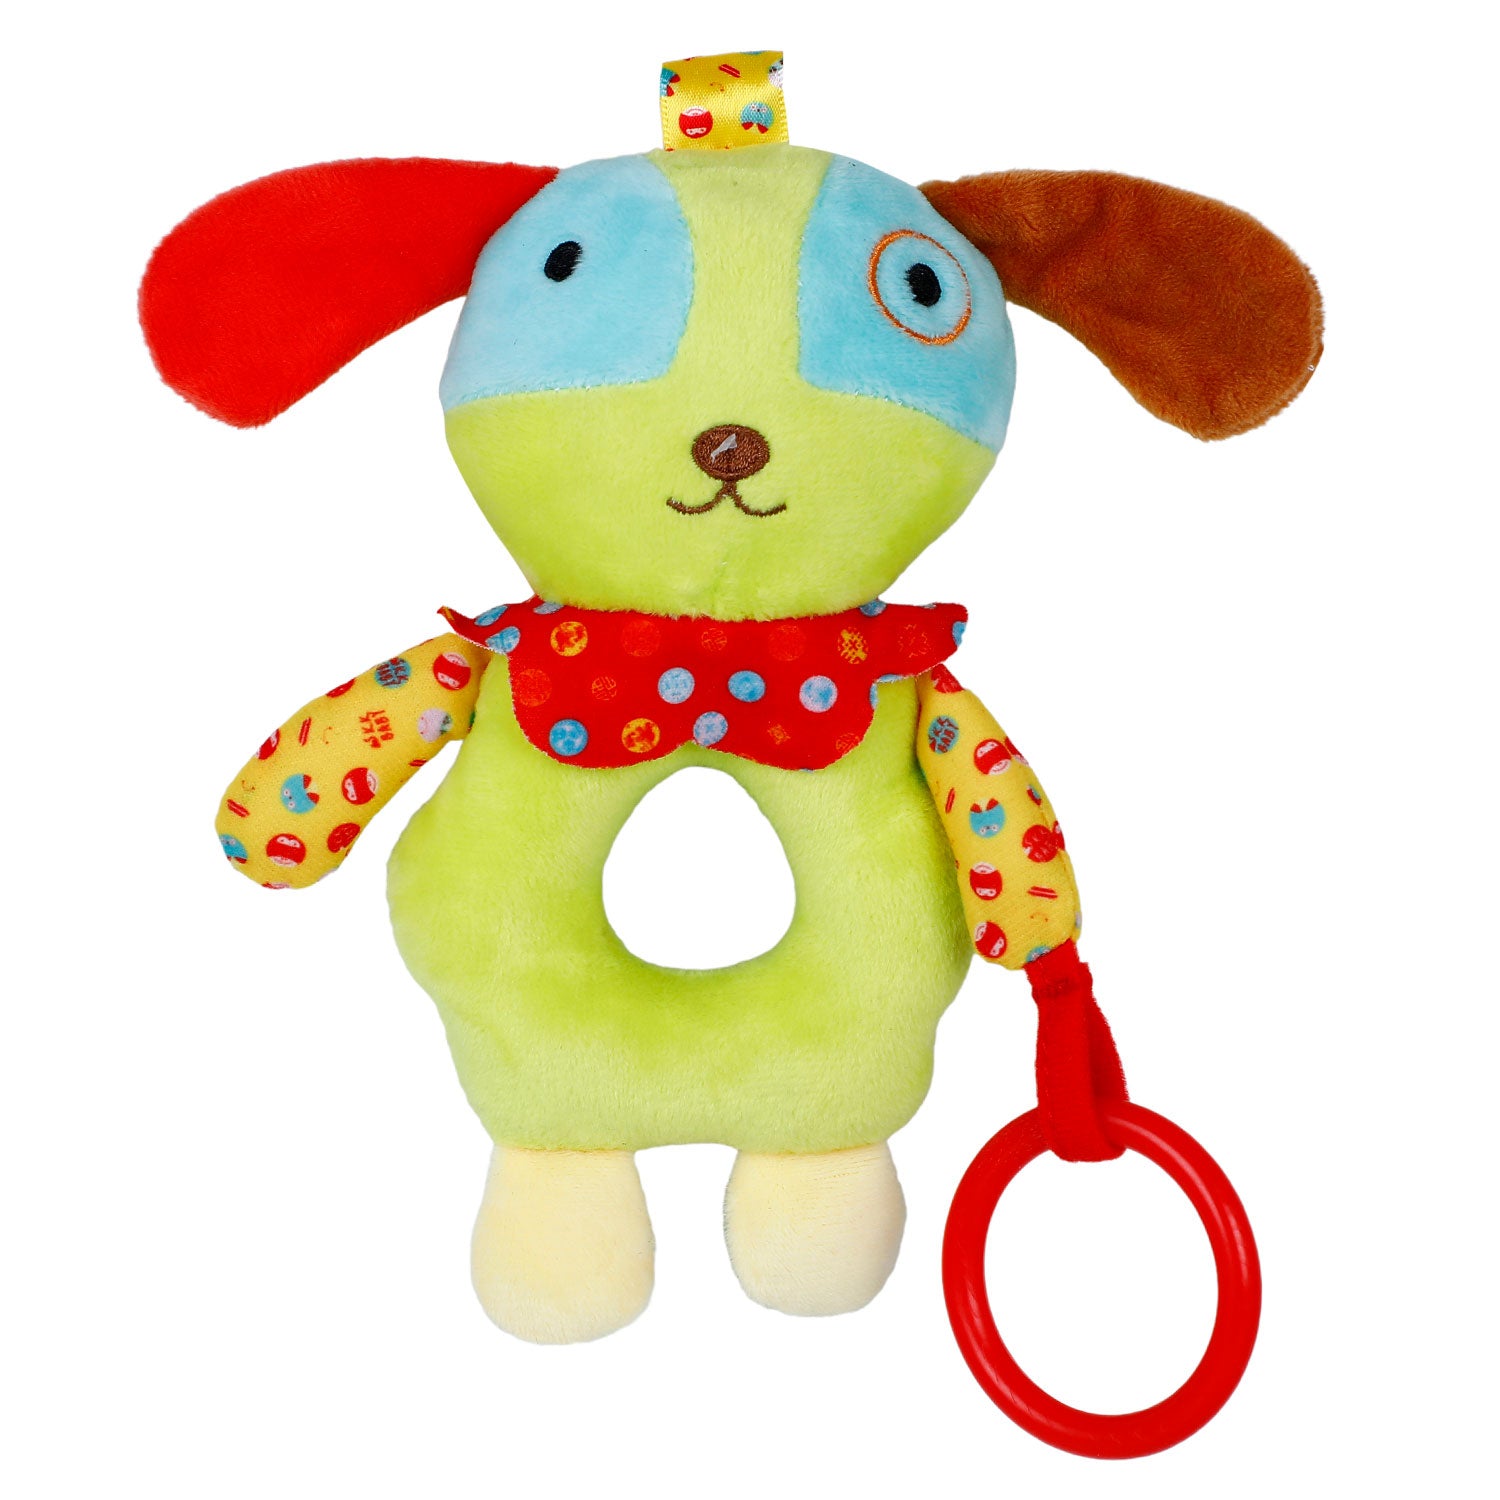 Baby Moo Dog Rustle Paper Handheld Rattle Toy - Green